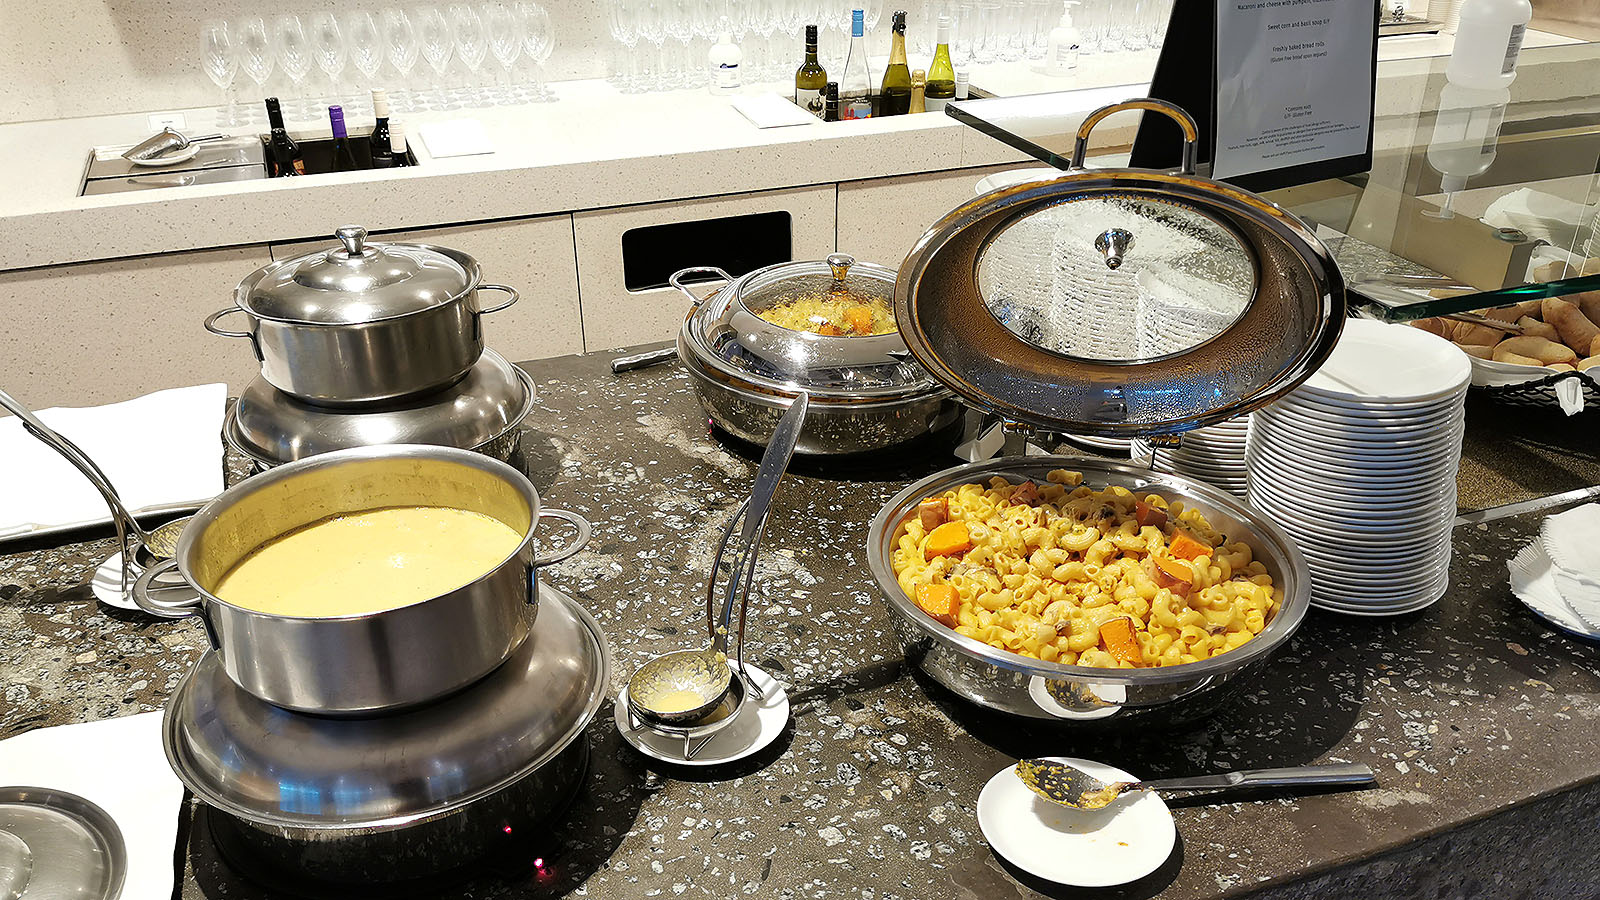 Hot buffet items at the Qantas International Business Lounge in Singapore